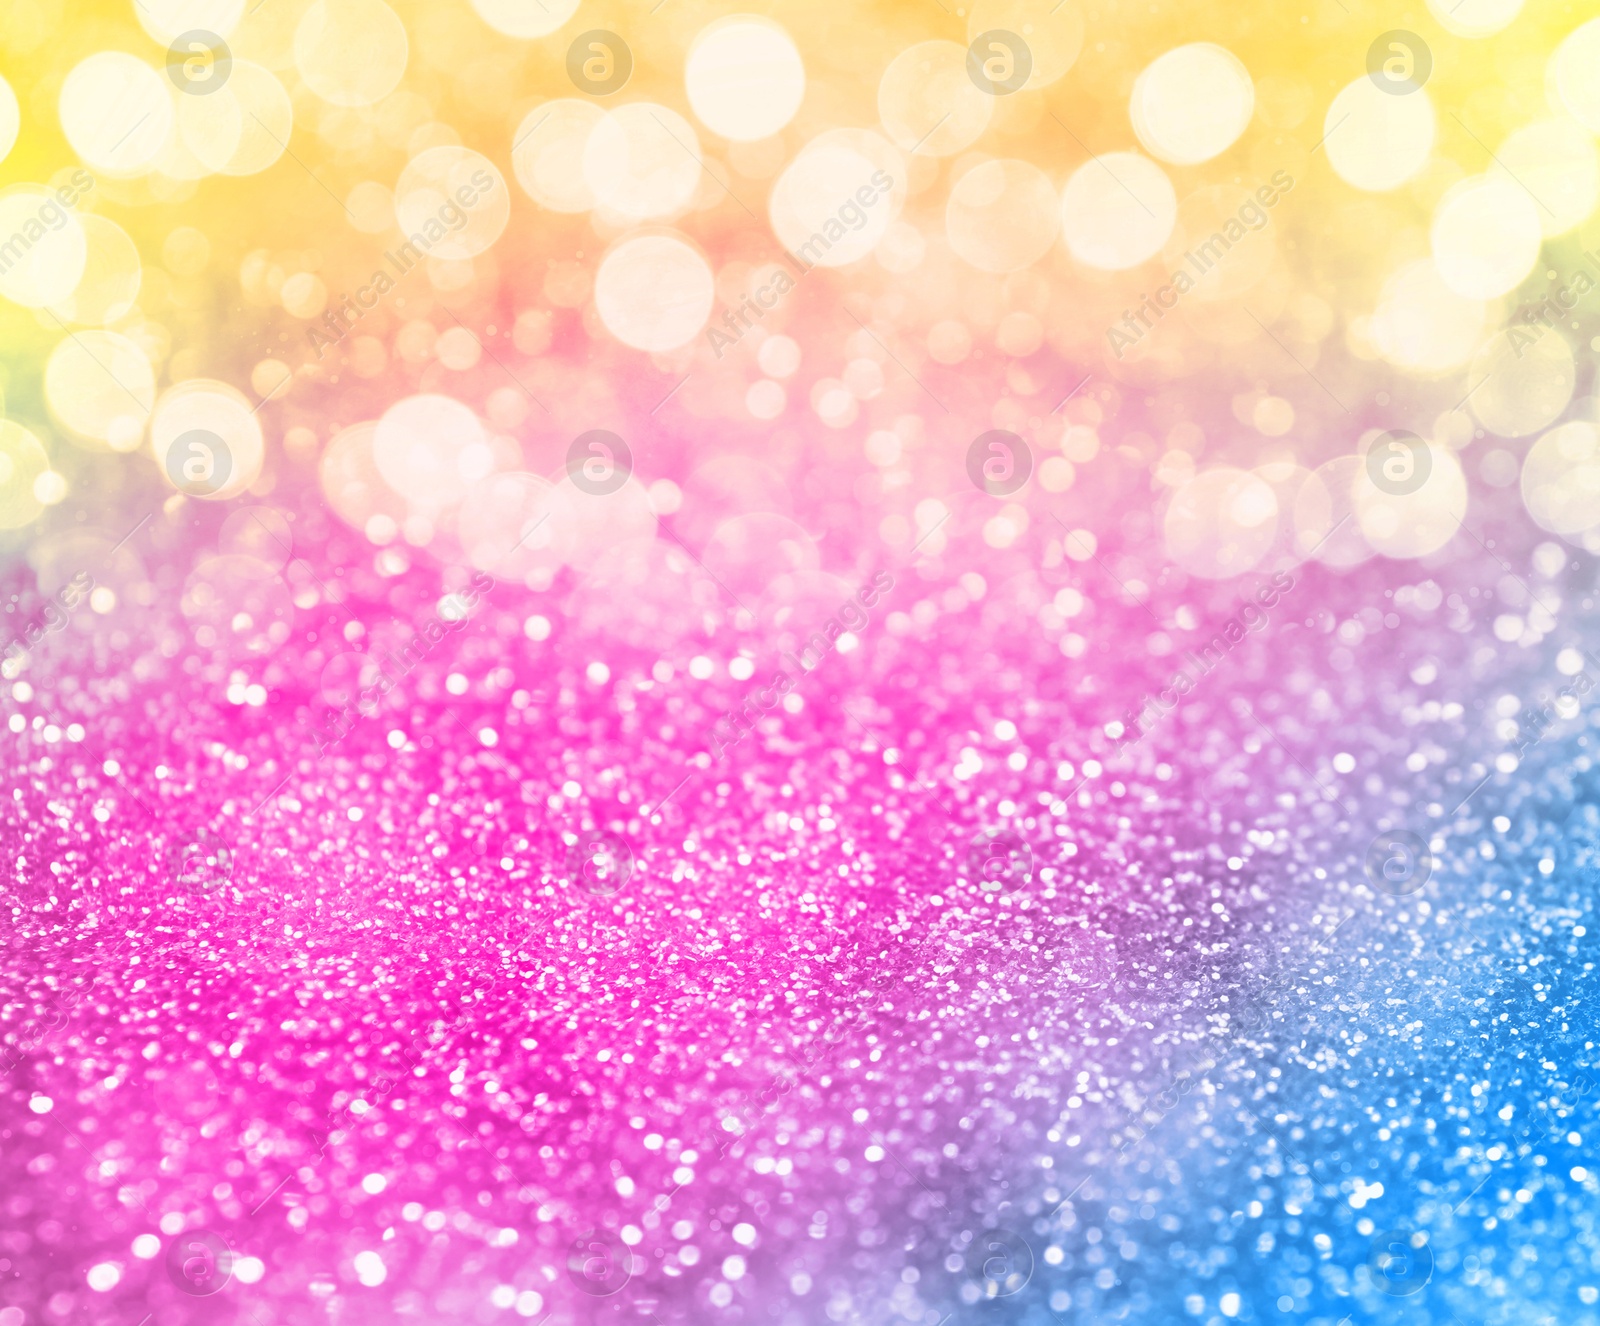 Image of Bright colorful sparkling glitter with bokeh effect, closeup. Background for party invitations or holiday cards